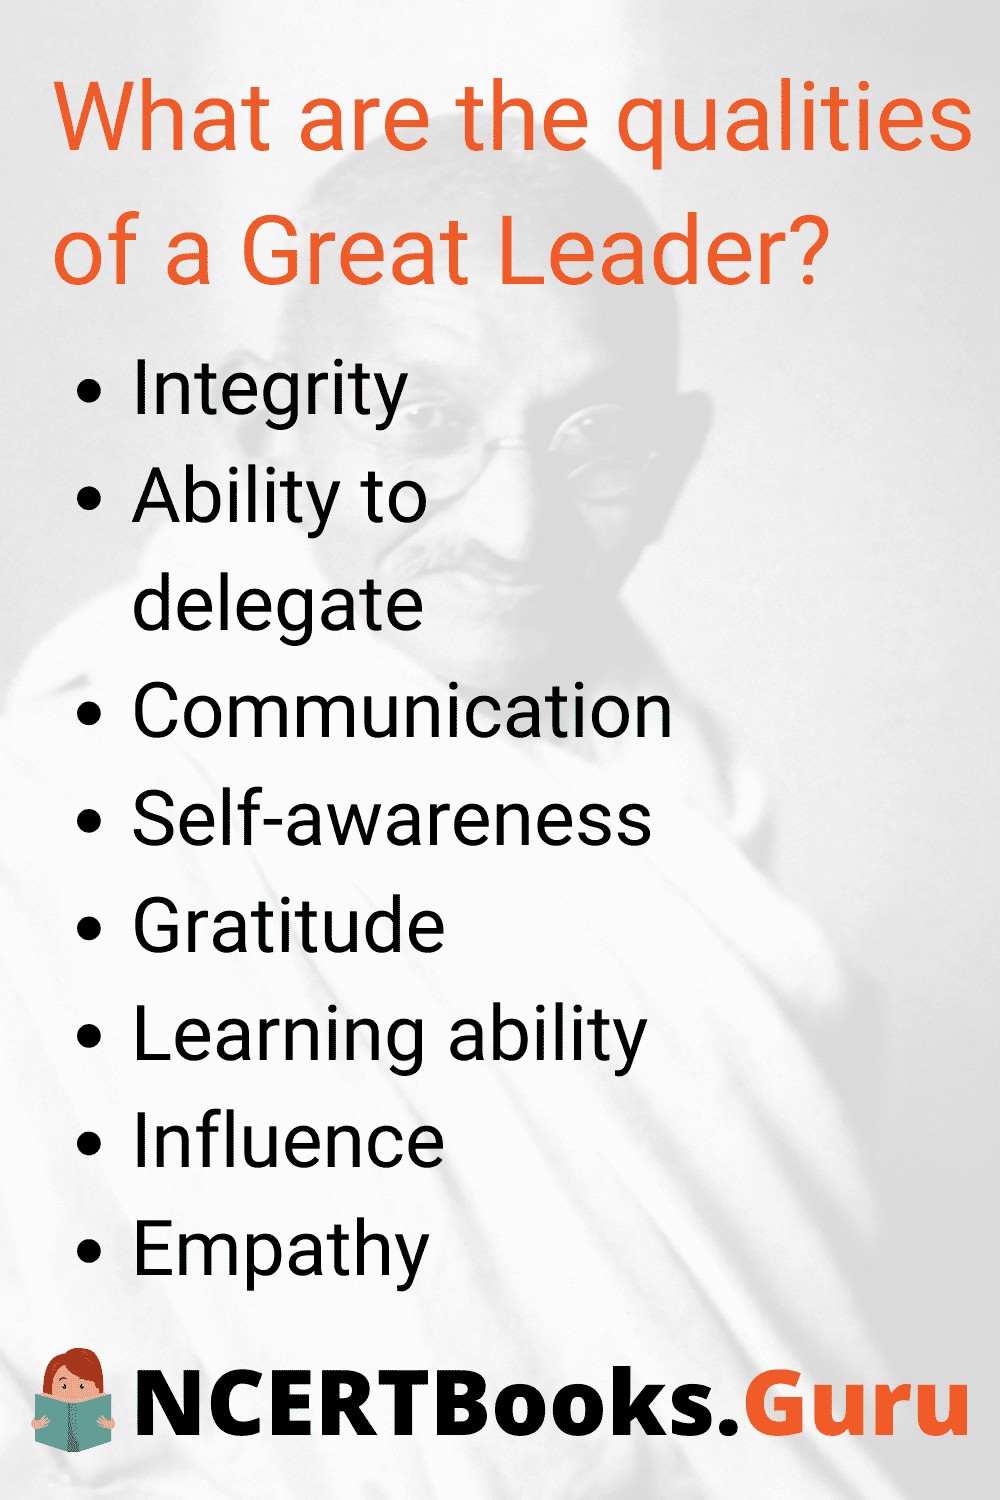 write an essay on any great leader